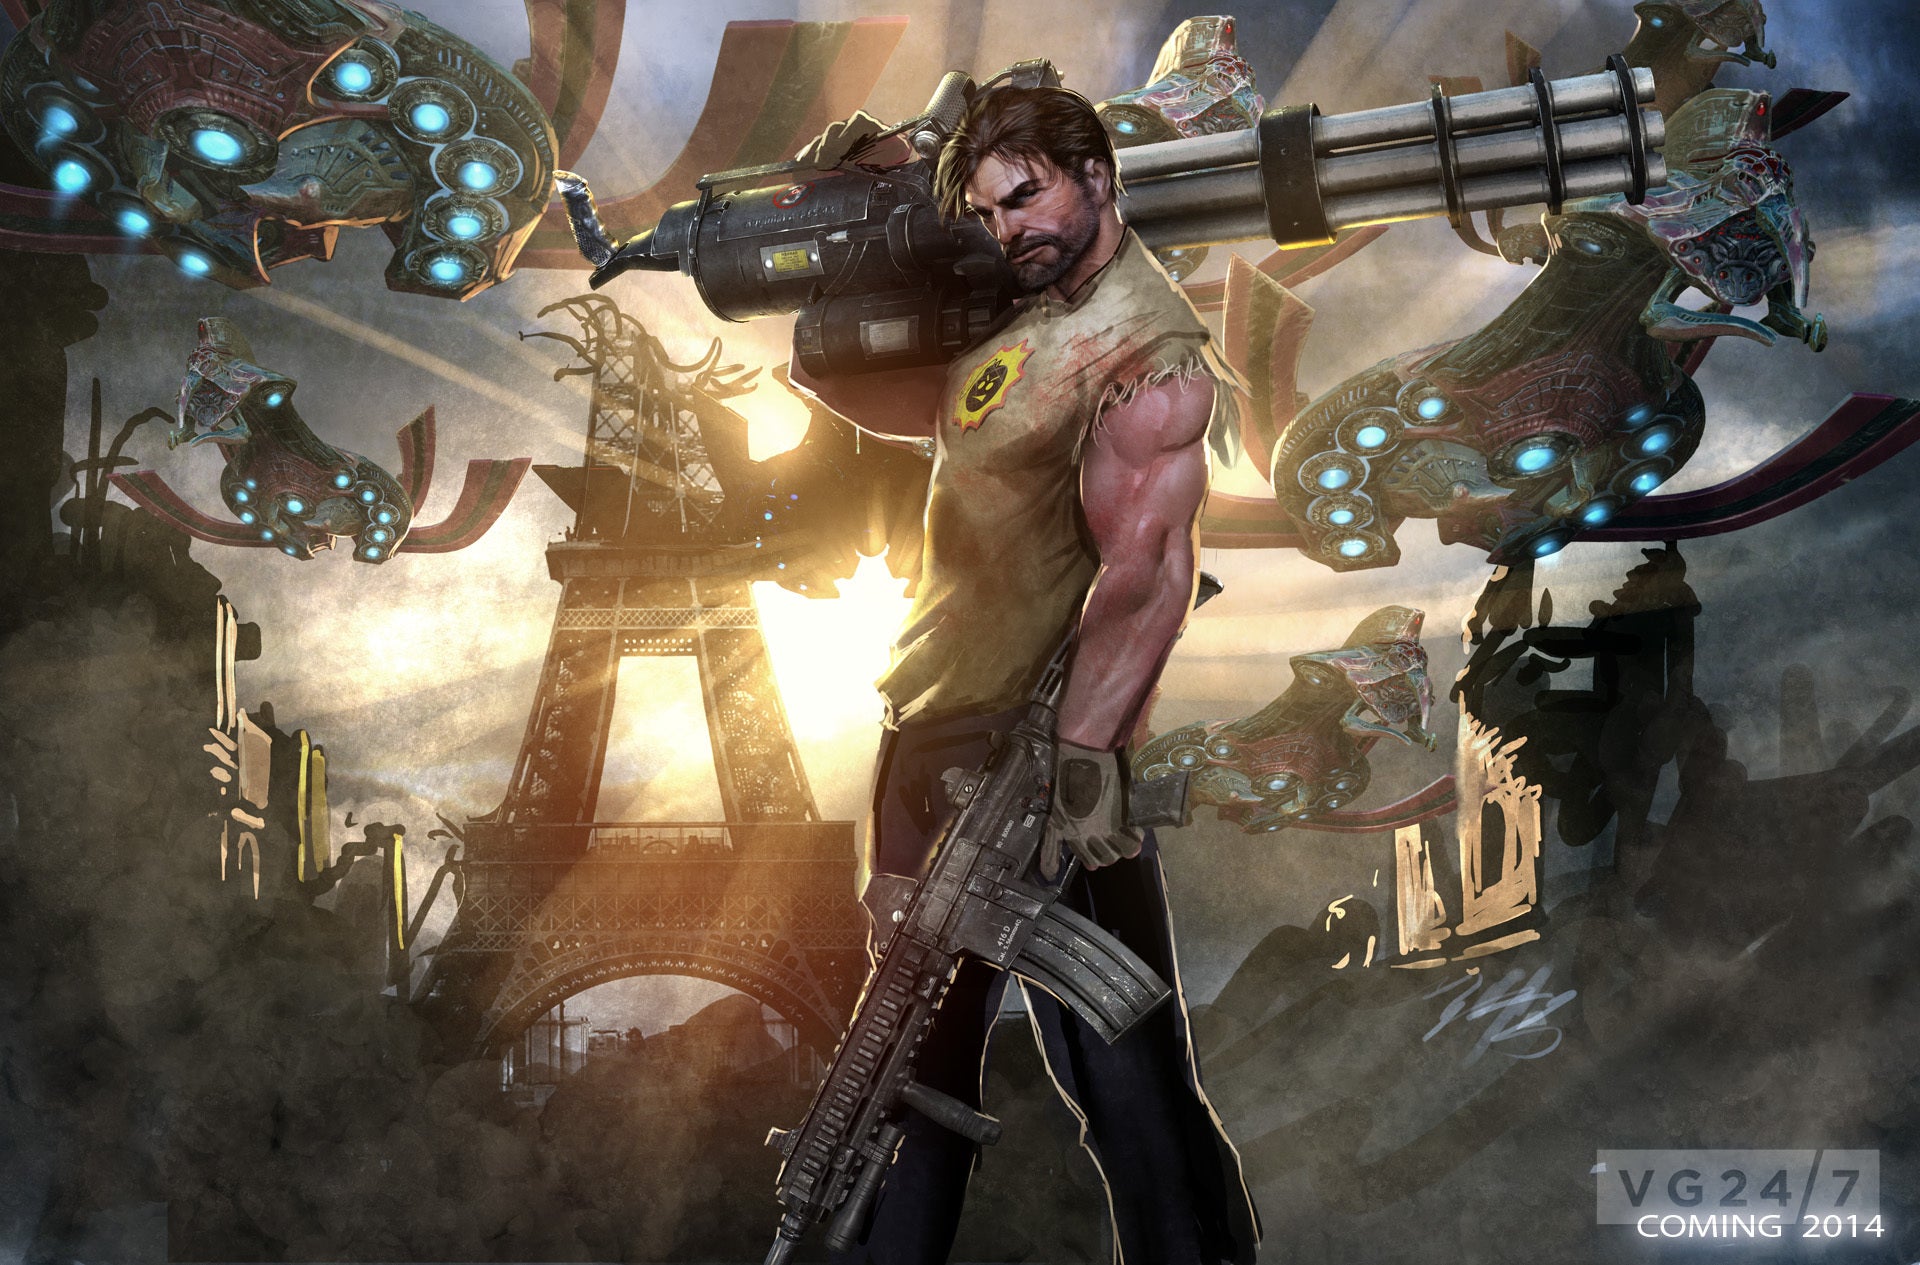 Image for Serious Sam 4: Planet Badass teased, full reveal coming at E3 2018